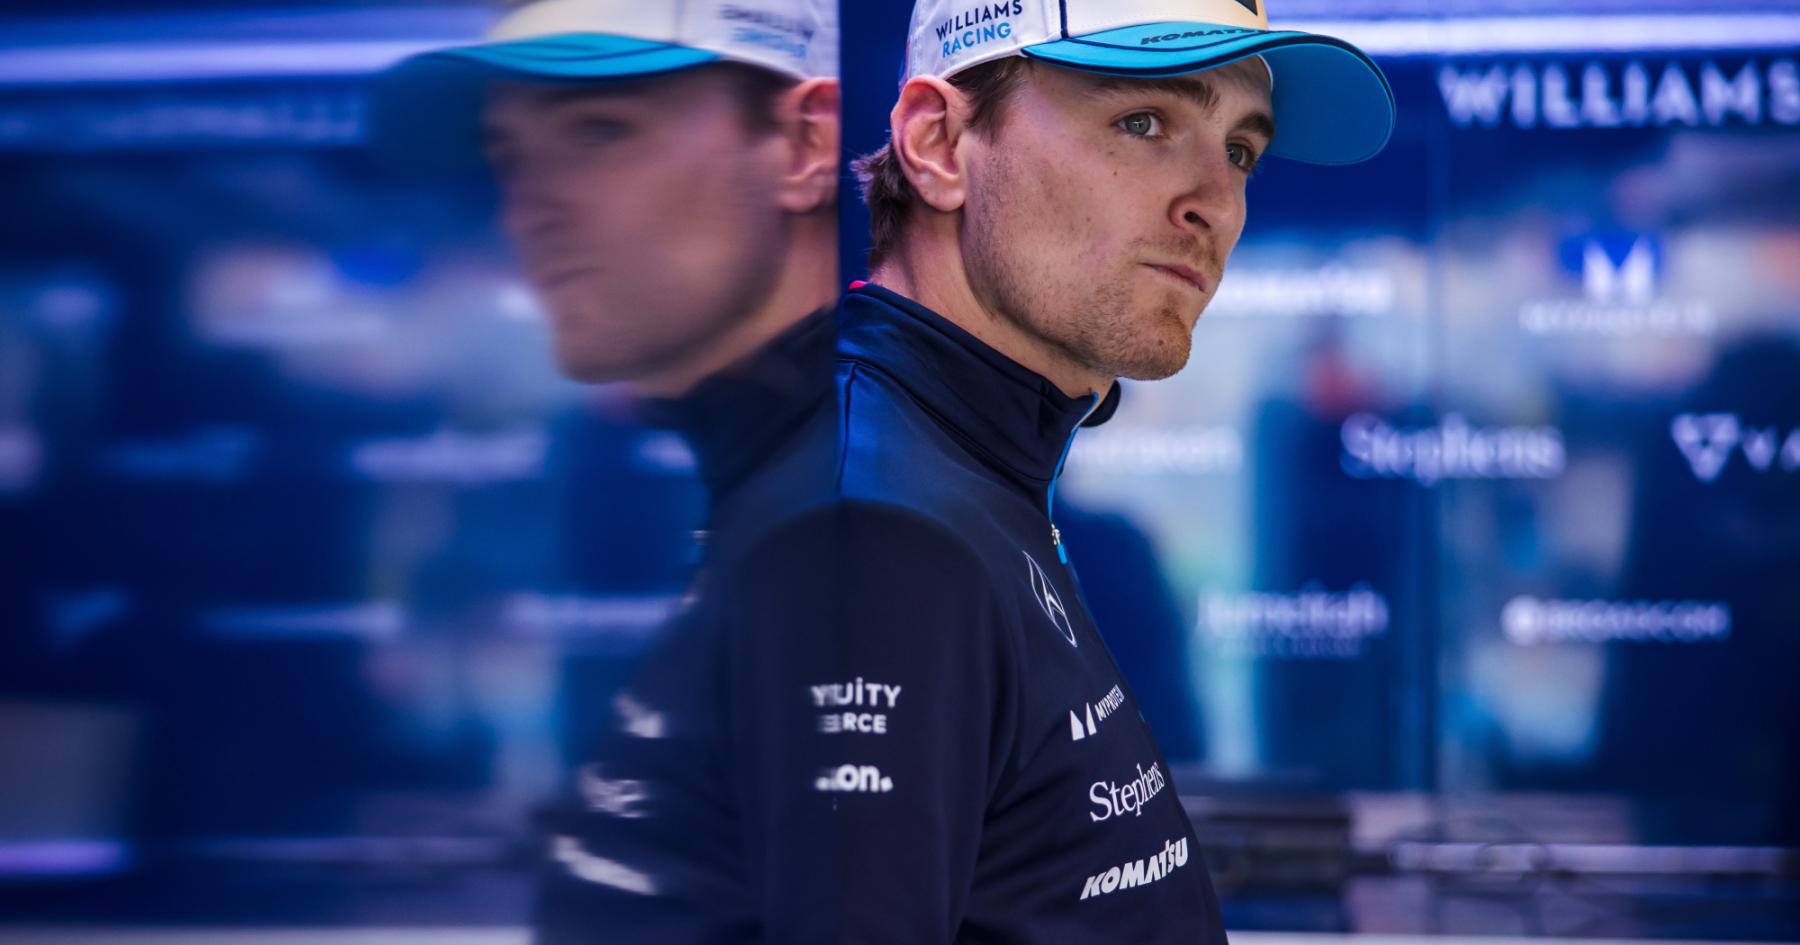 The Formula 1 Insider's Bold Critique of Williams' Driver Swap Choice